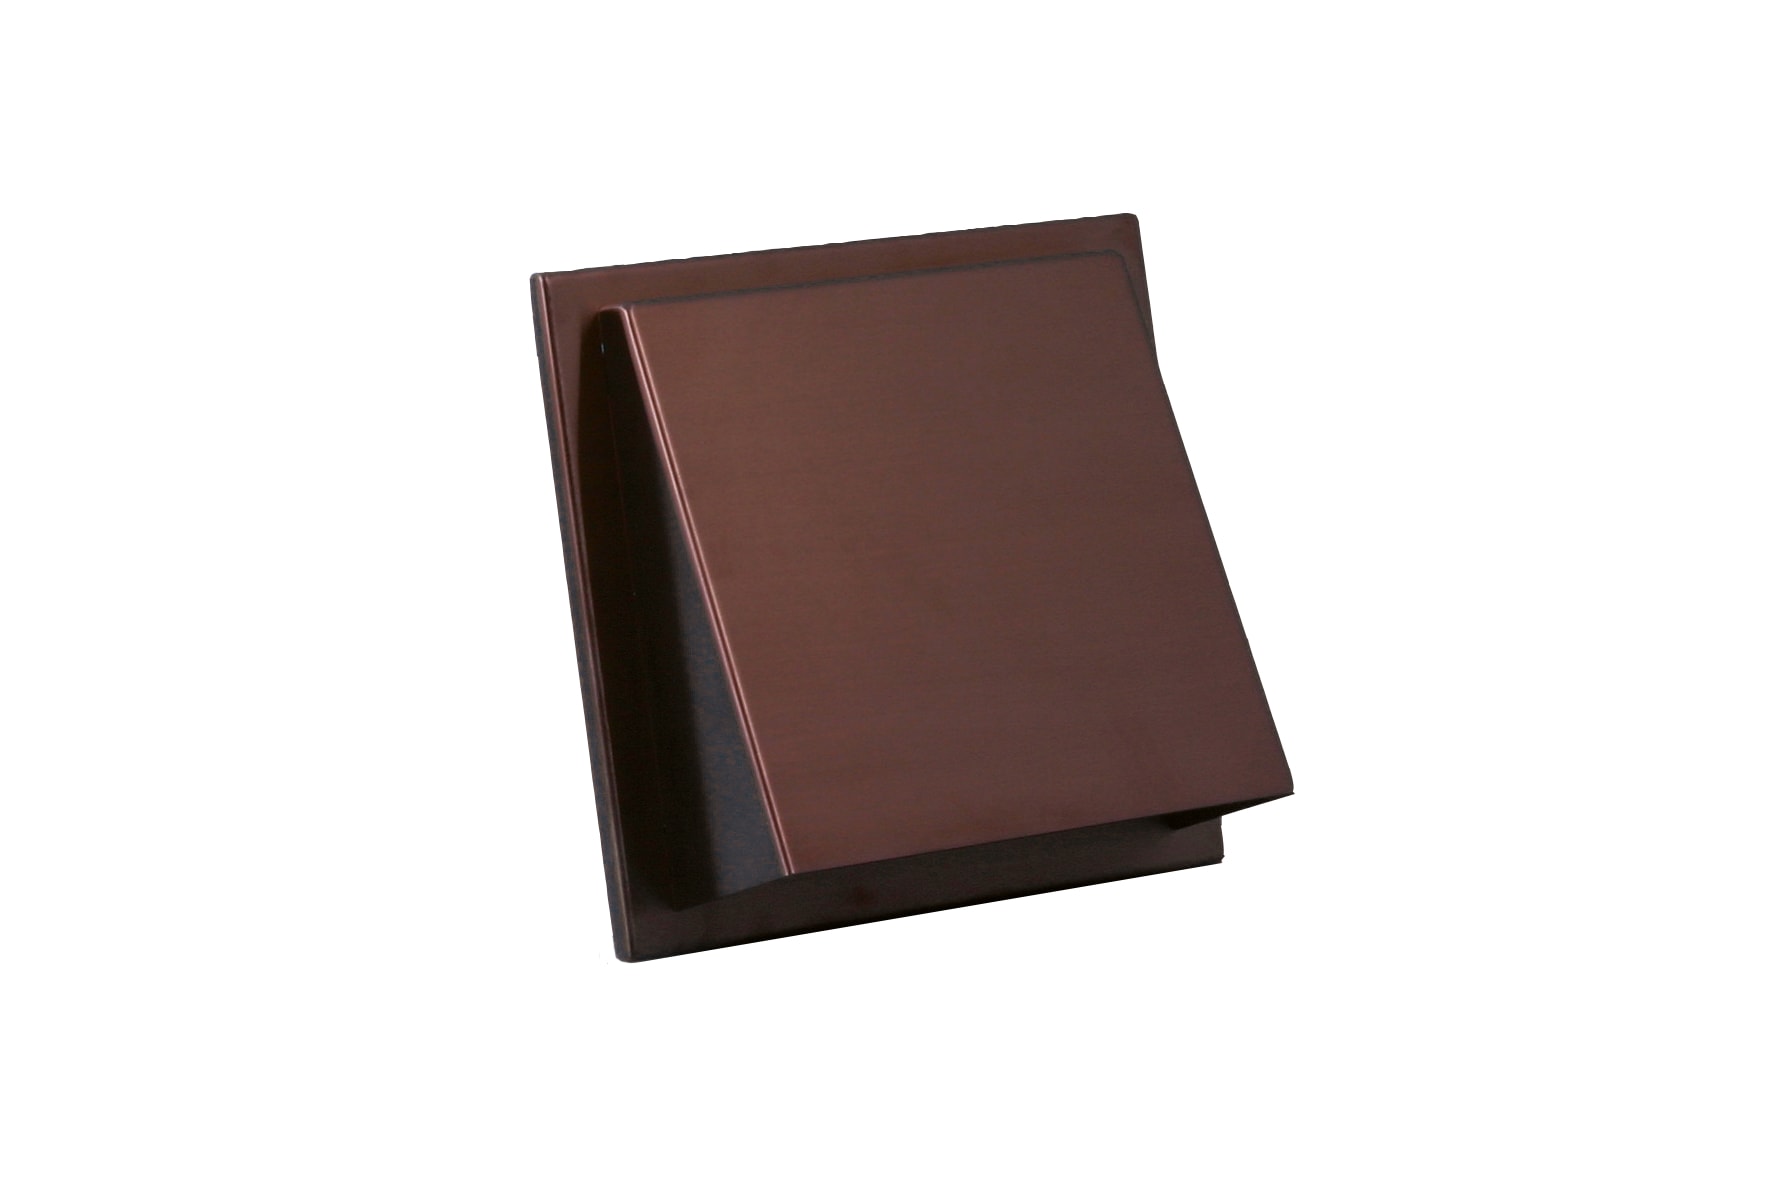 62602326 Ss outdoor air vent angled cowl Ø 150mm red copper